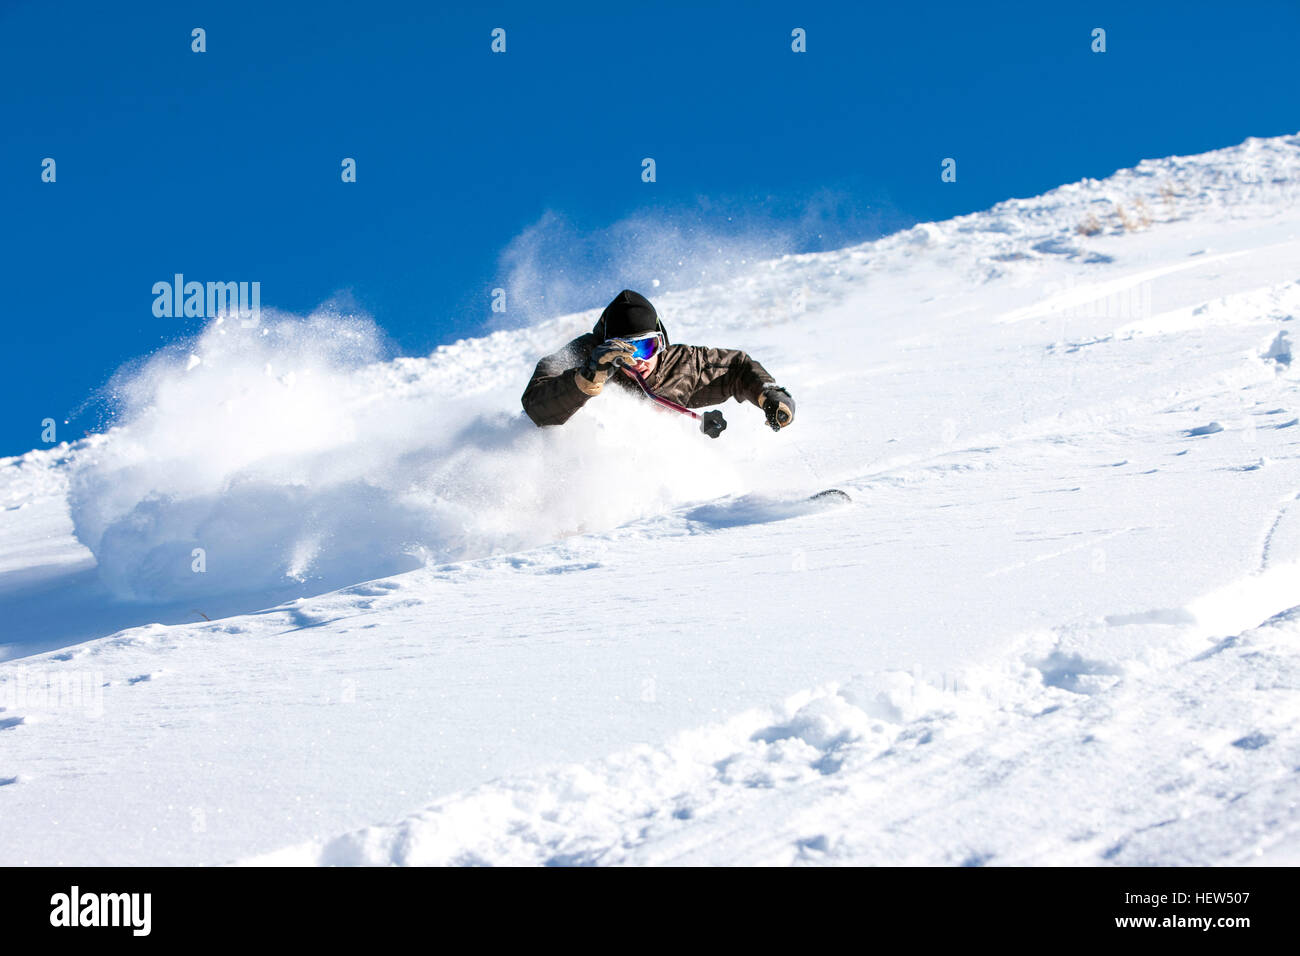 Skier, skiing downhill, low angle view Stock Photo